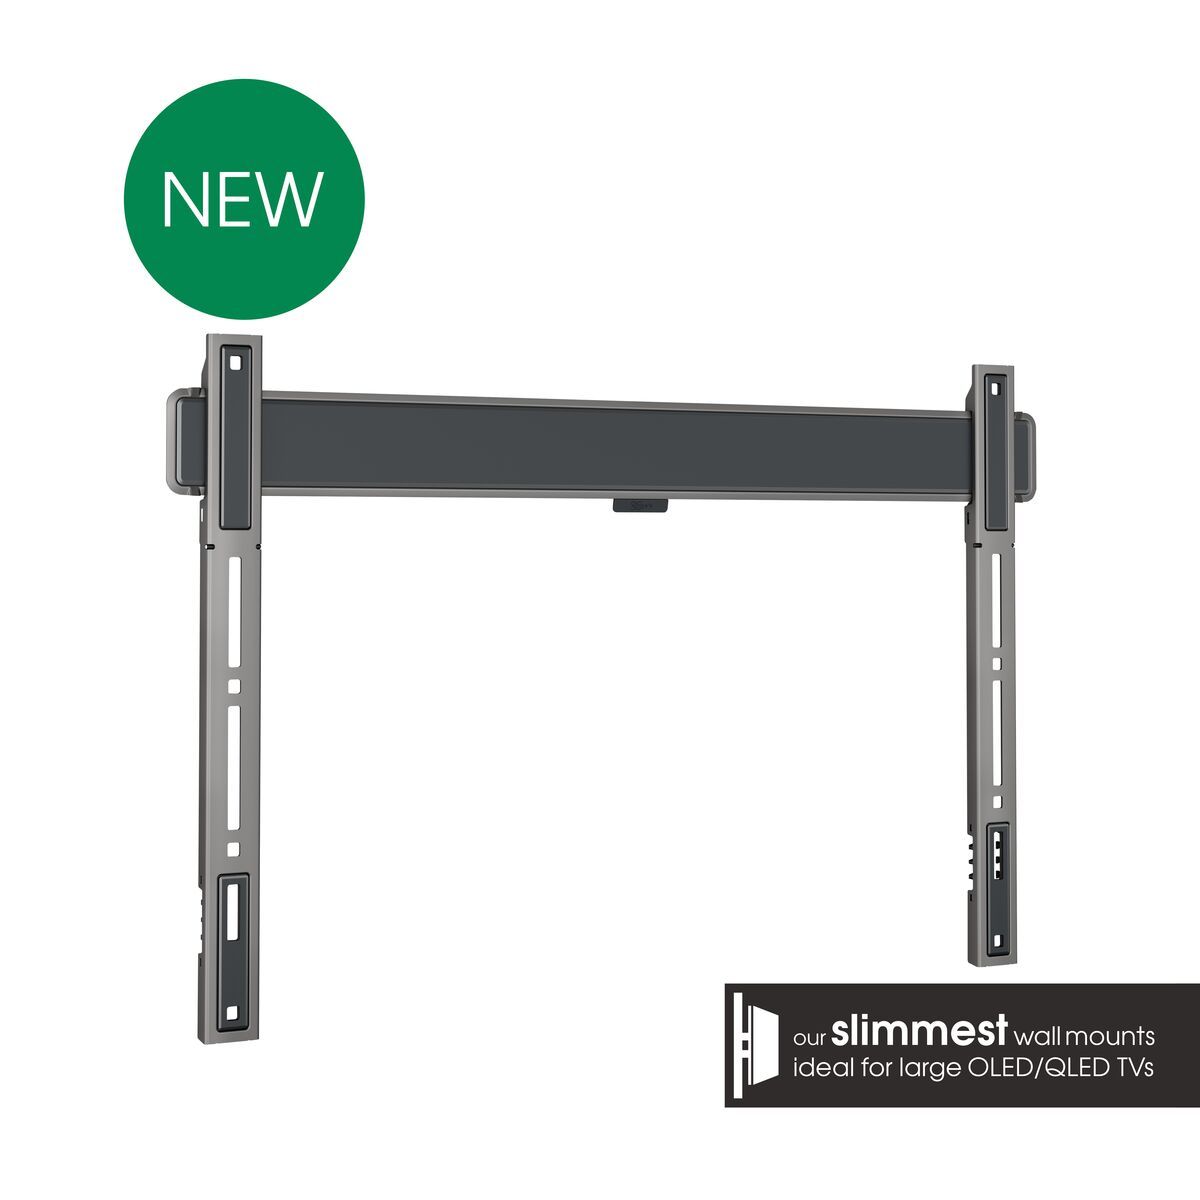 Vogel's TVM 5605 Fixed TV Wall Mount - Suitable for 40 up to 100 inch TVs - Promo